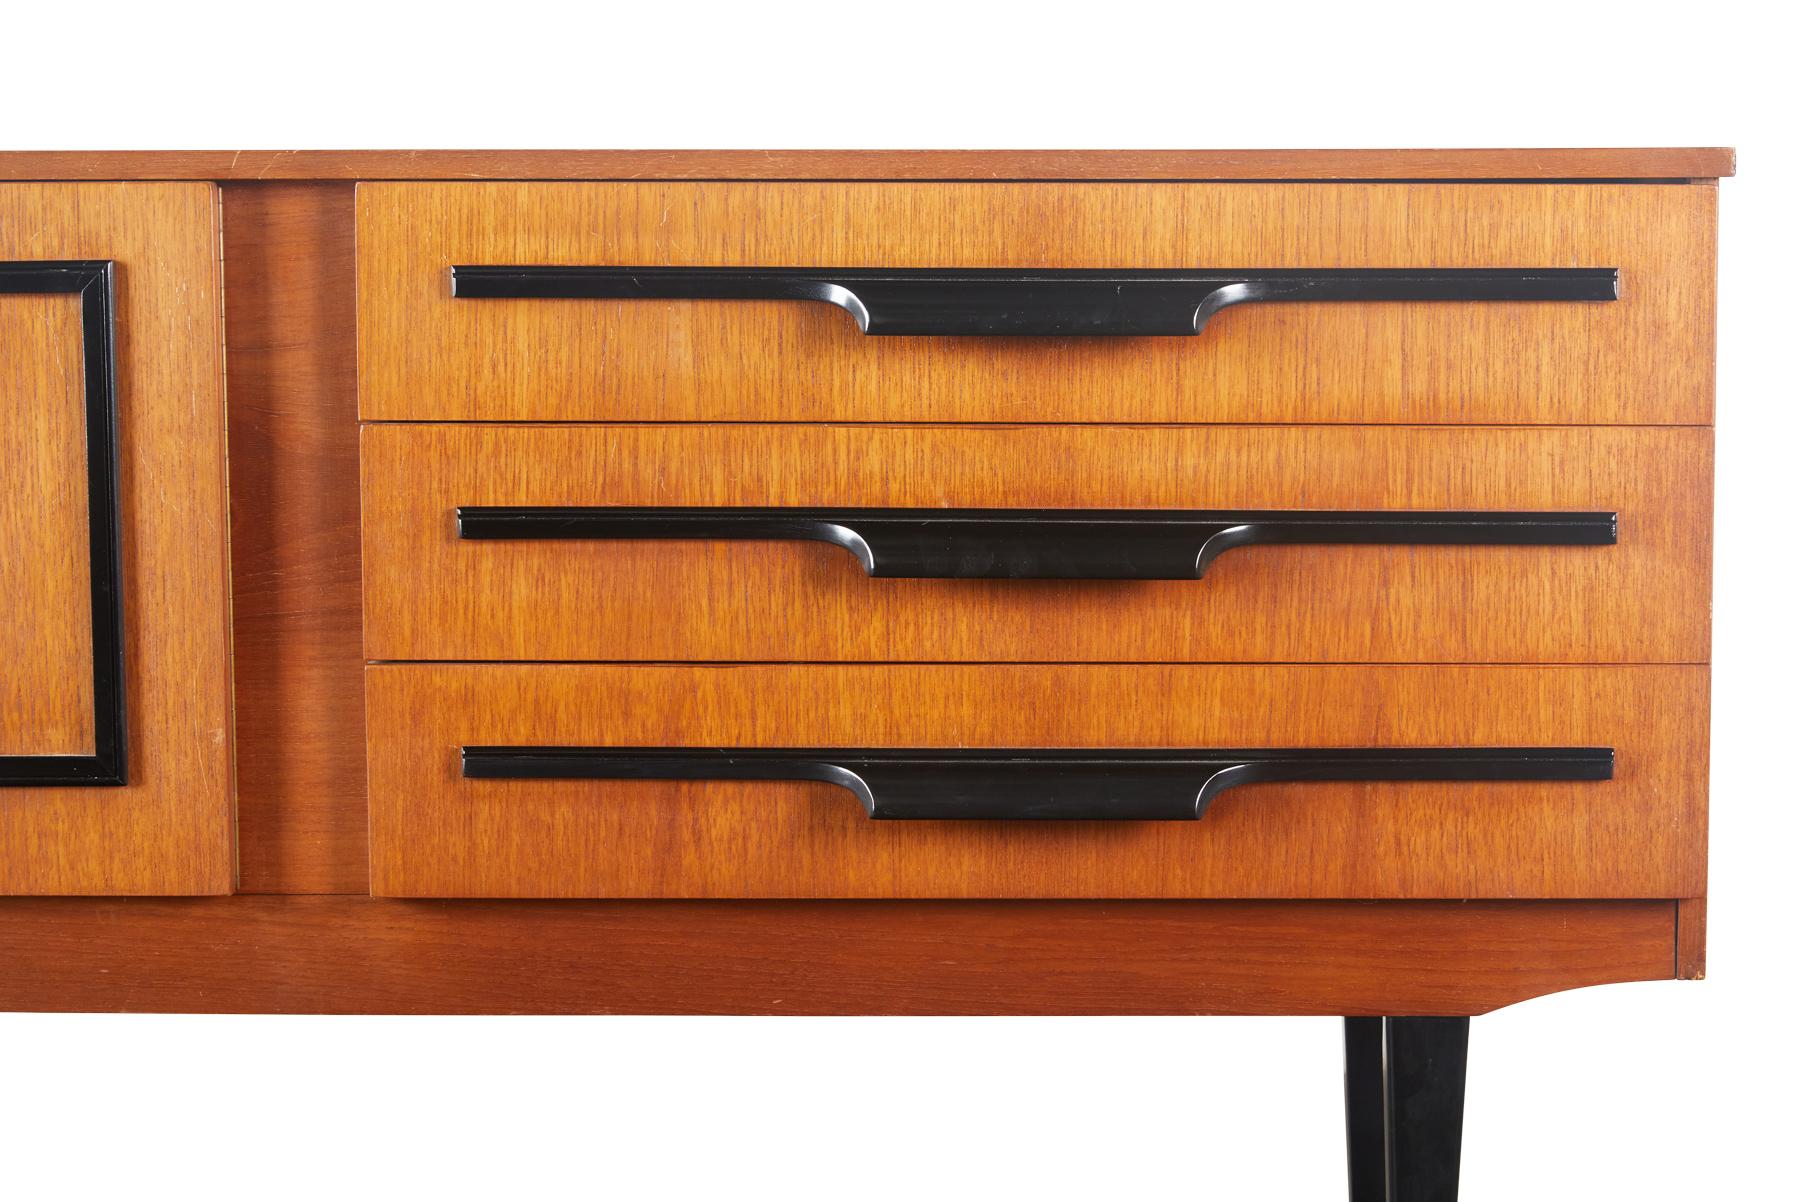 English Modern Midcentury Credenza in Teak with Black Lacquer Accents For Sale 2